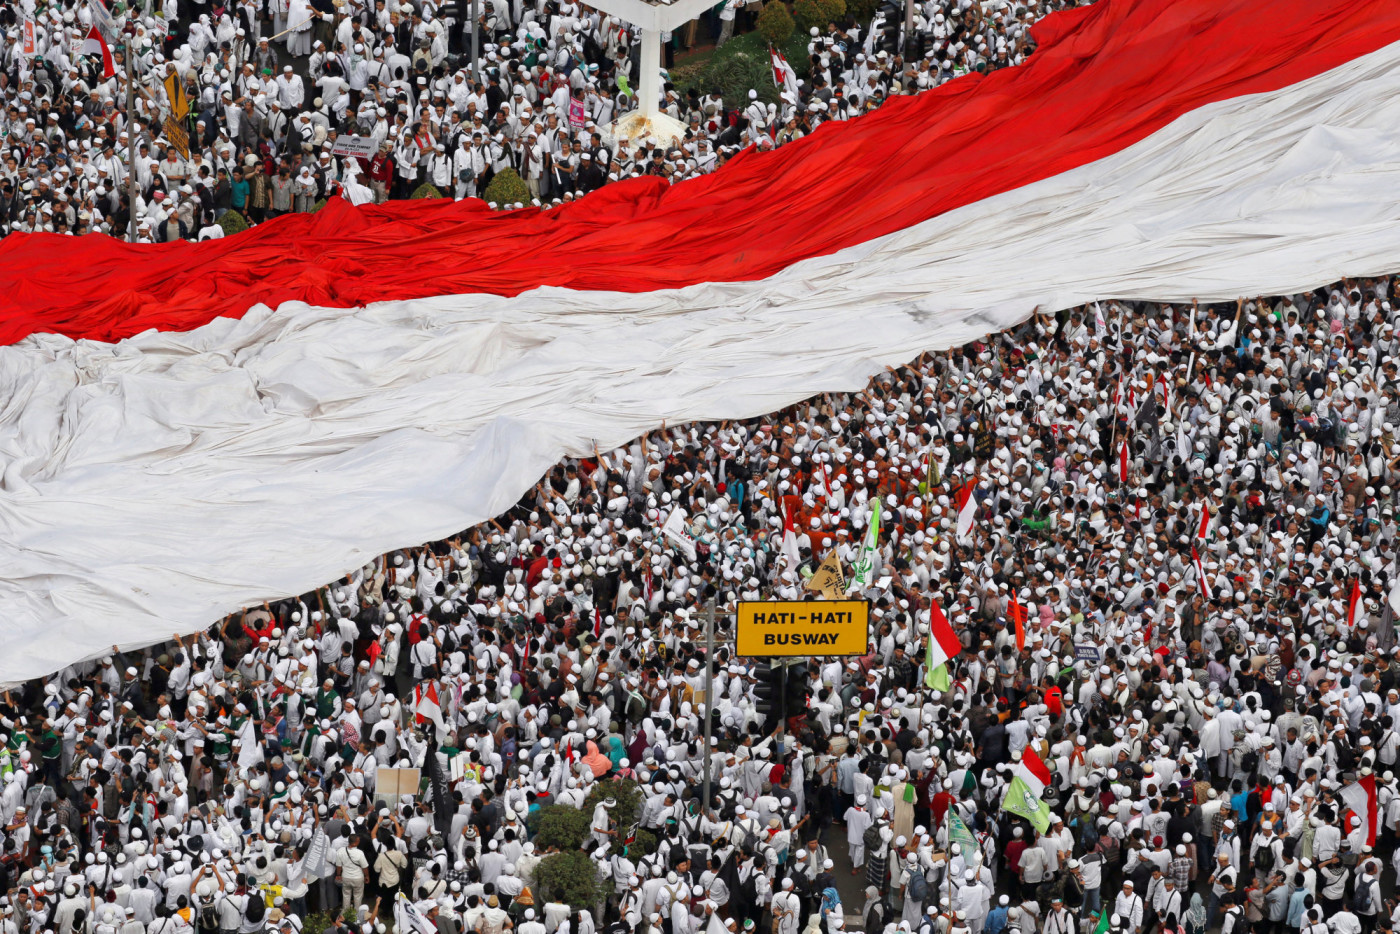 FILE PHOTO - Members of hardline Muslim groups hold a big national flag as they attend a protest against Jakarta's incumbent governor Basuki Tjahaja Purnama, an ethnic Chinese Christian running in the upcoming election, in Jakarta, Indonesia, November 4, 2016. REUTERS/Beawiharta/File Photo